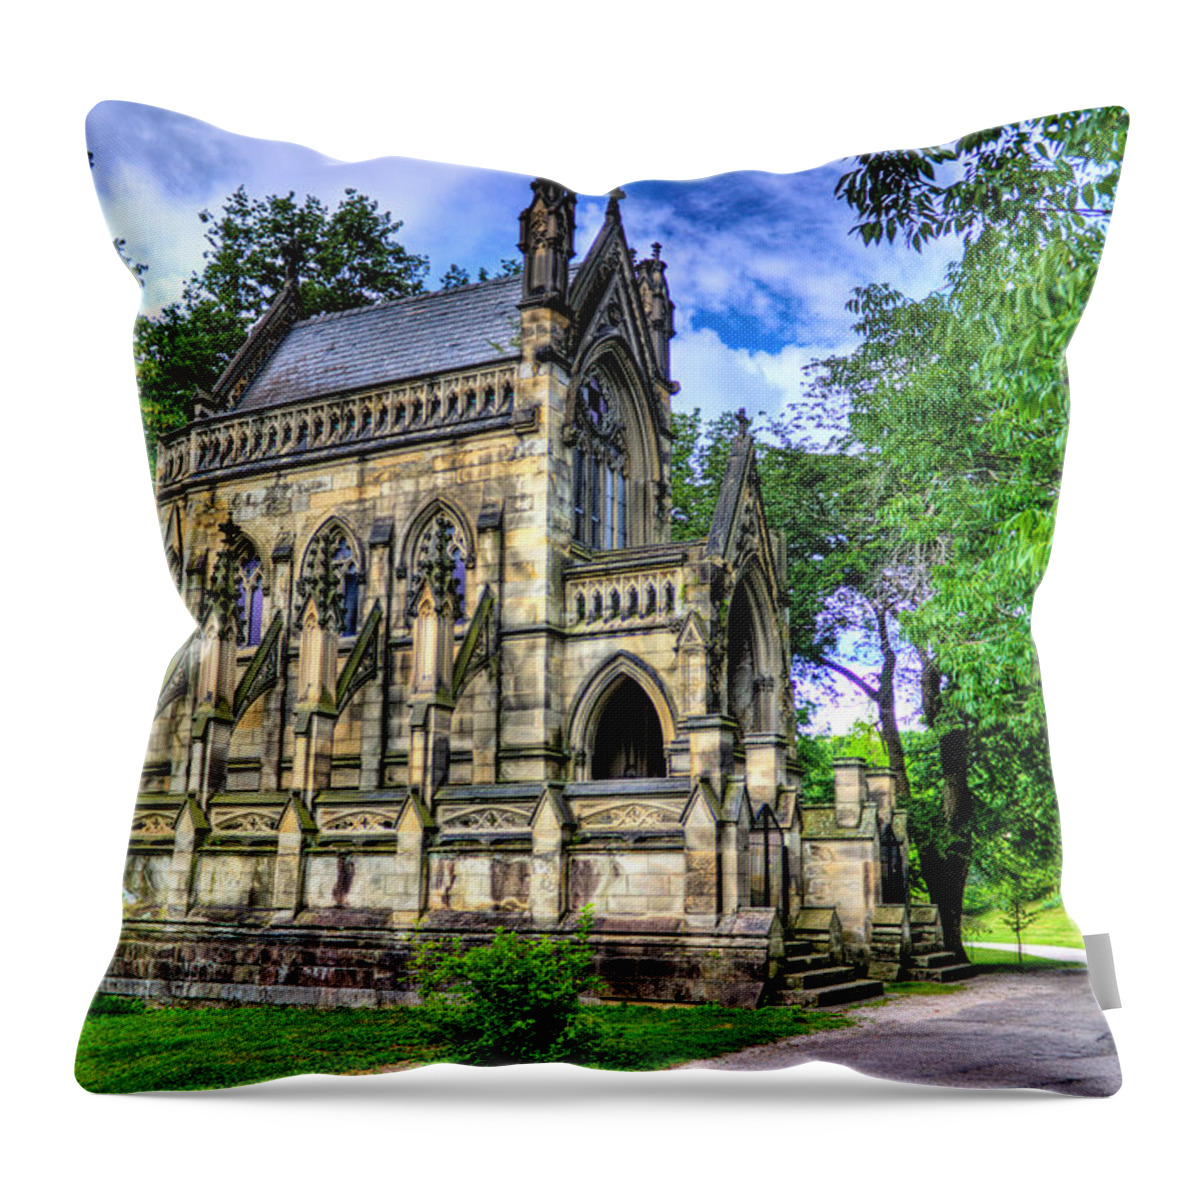 Spring Grove Throw Pillow featuring the photograph Giant Spring Grove Mausoleum by Jonny D